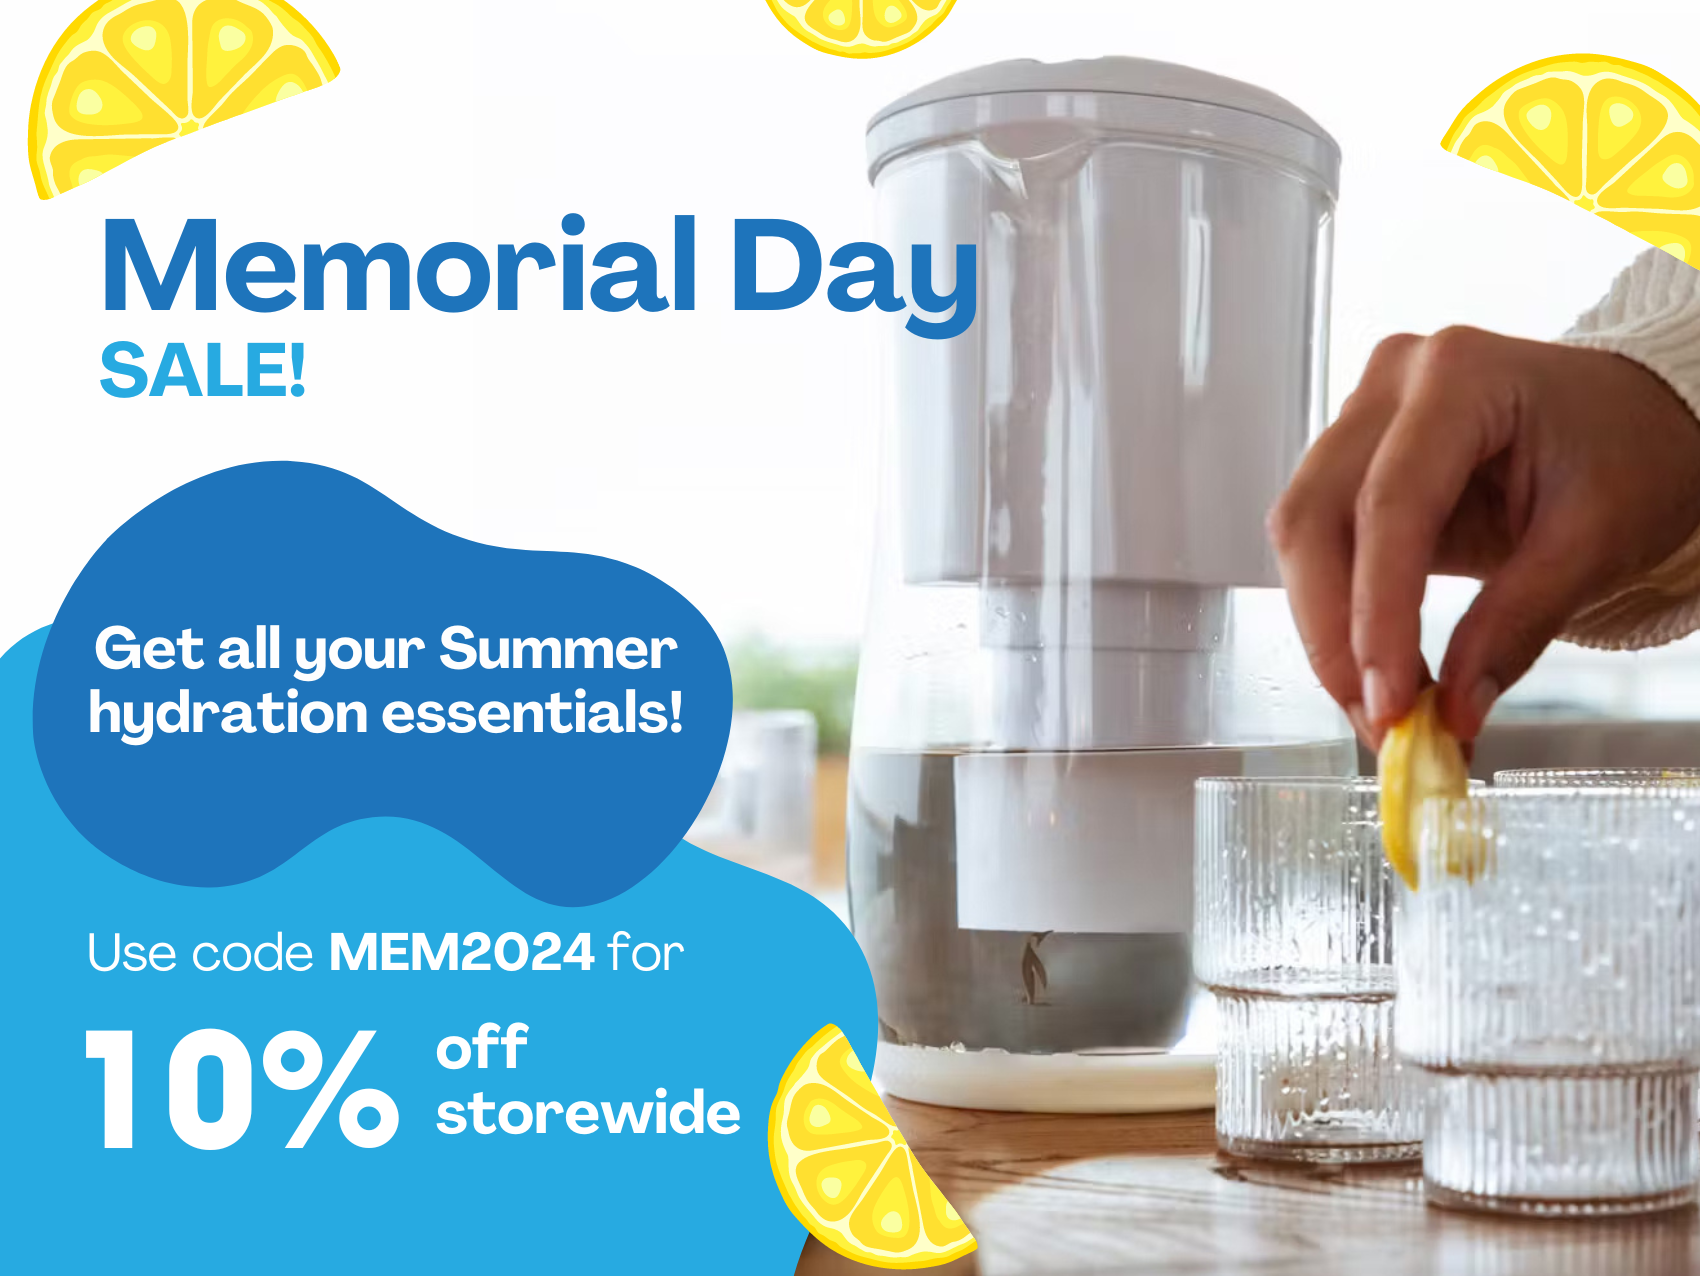 Memorial Day Special: 10% off store-wide